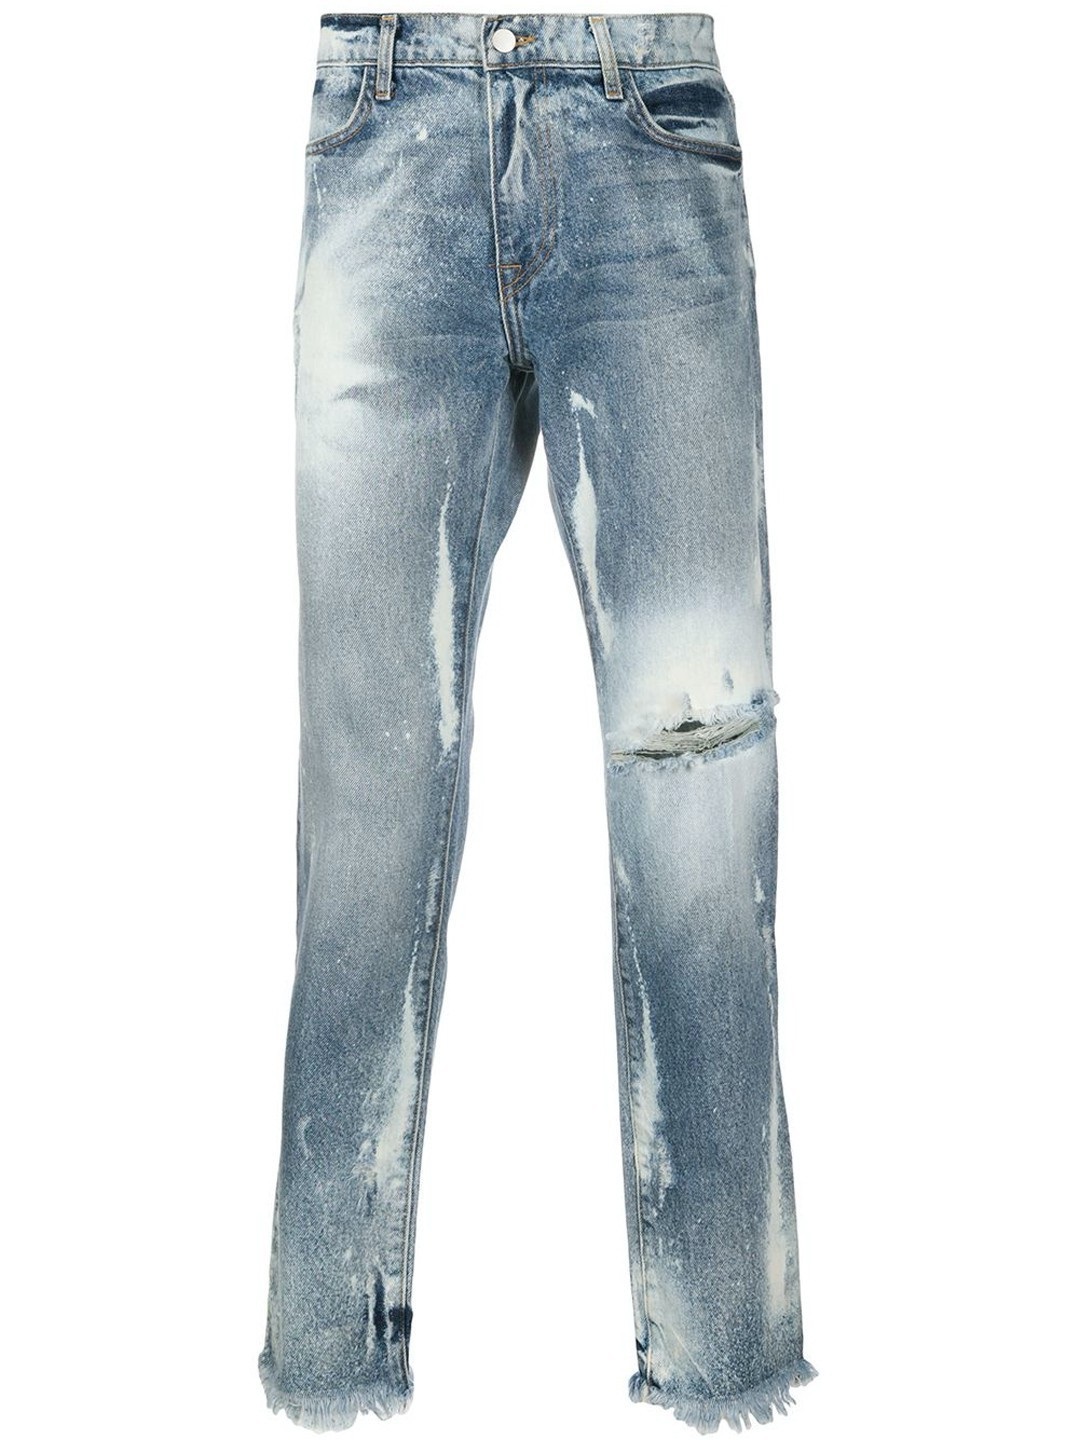 424 424 MENS BLUE MARSHALL JEANS WASHED-OUT